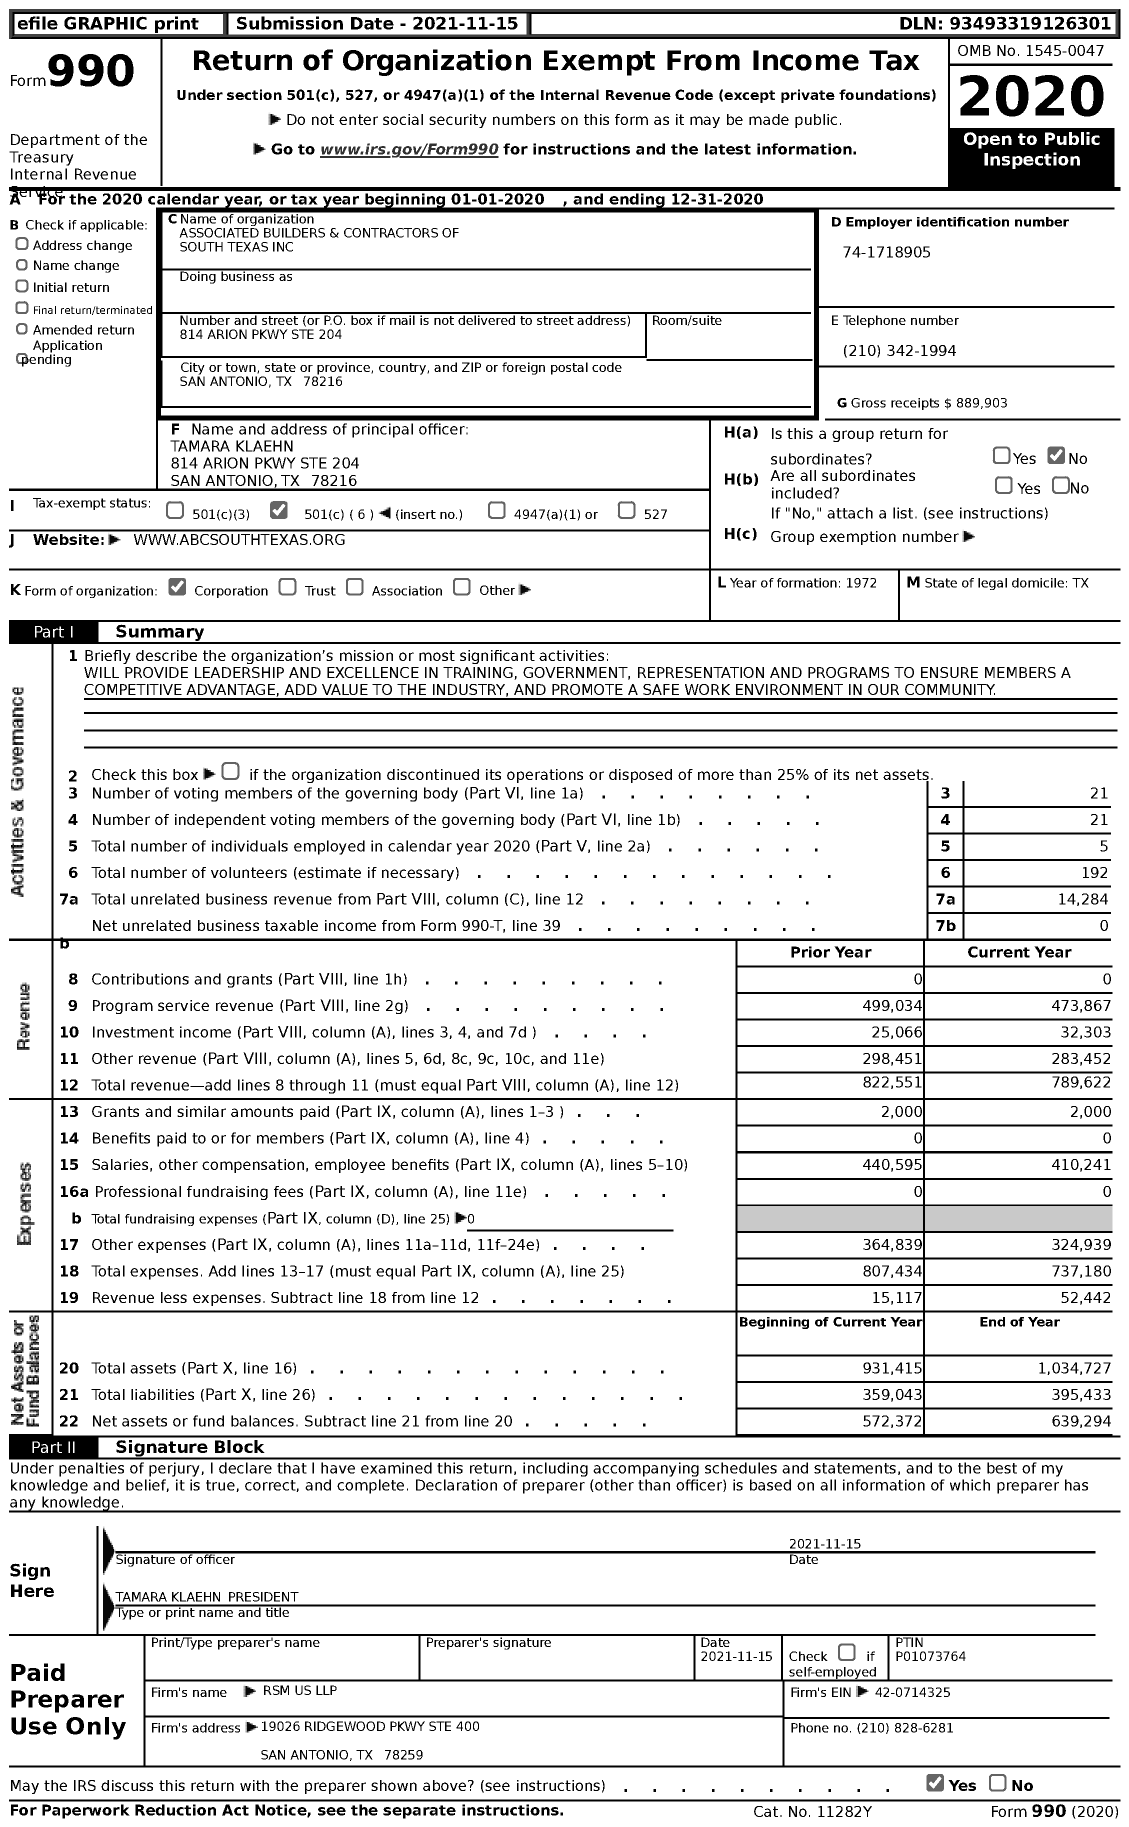 Image of first page of 2020 Form 990 for Associated Builders & Contractors of South Texas